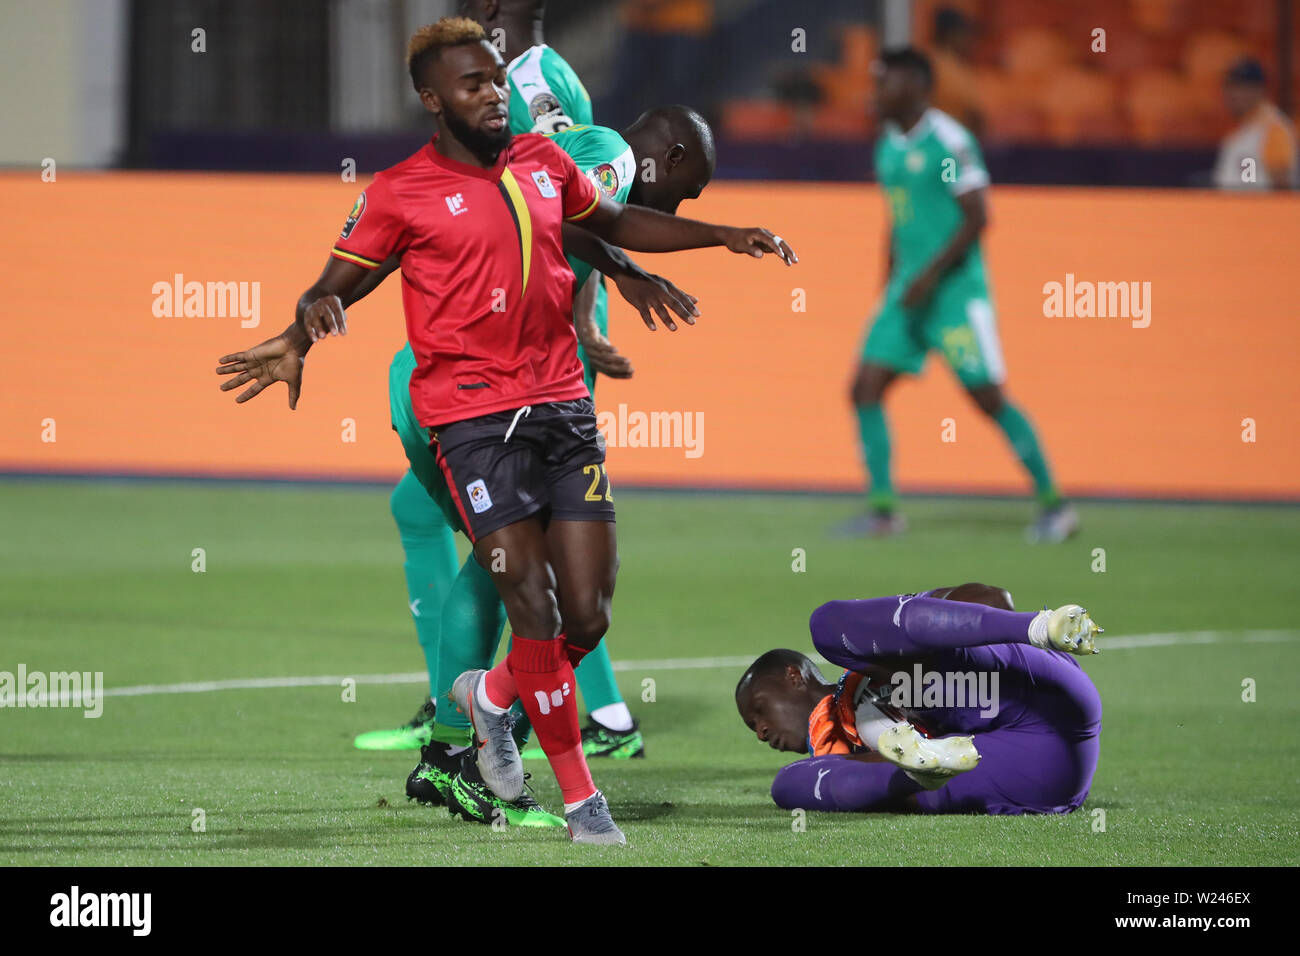 Cairo, Egypt. 05th July, 2019. Senegal's Alfred Gomis (R) catches the ball before Uganda's Lumala Abdu during the 2019 Africa Cup of Nations round of 16 soccer match between Uganda and Senegal at Cairo International Stadium. Credit: Gehad Hamdy/dpa/Alamy Live News Stock Photo